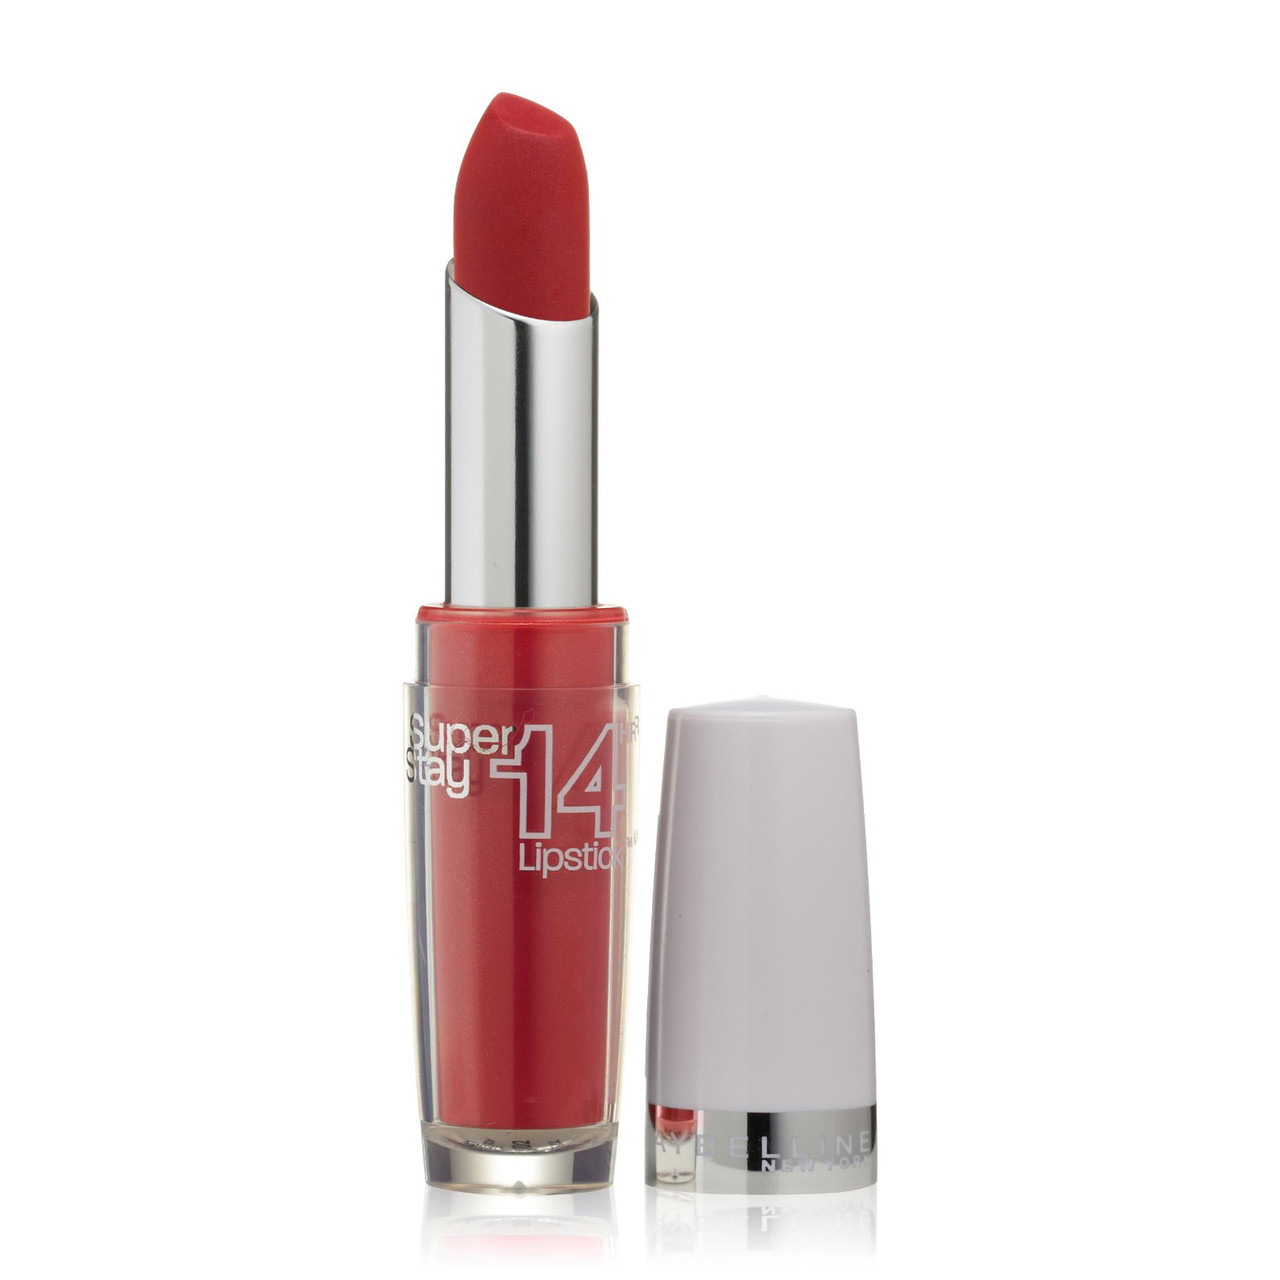 Beauty Hard Find To Stay 14HR York (060) Continuous Cranberry Maybelline - Super New Lipstick -